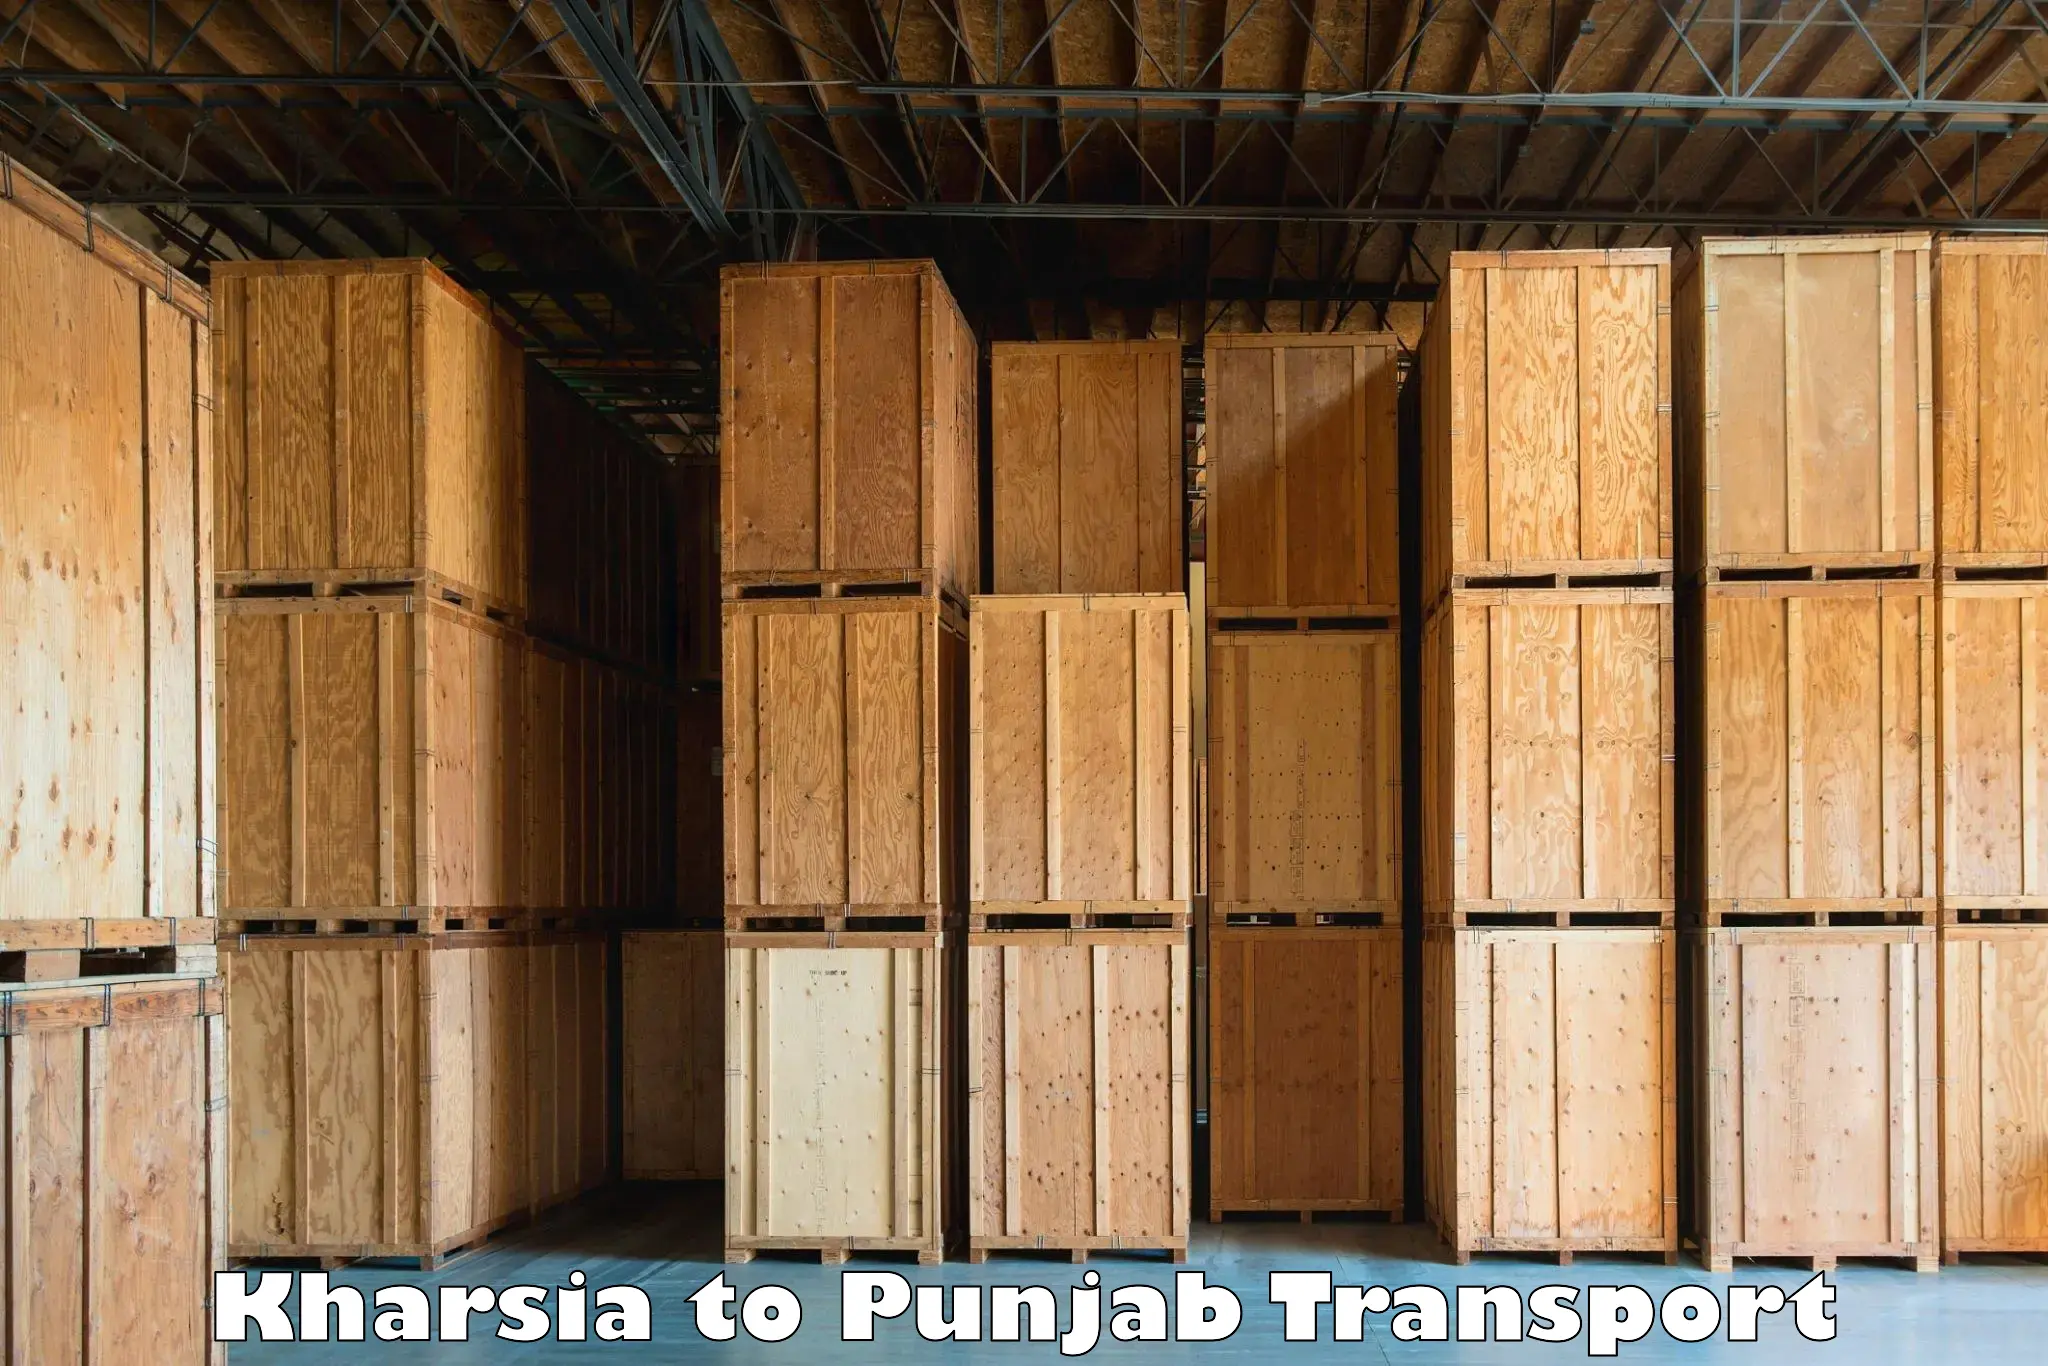 Truck transport companies in India Kharsia to Punjab